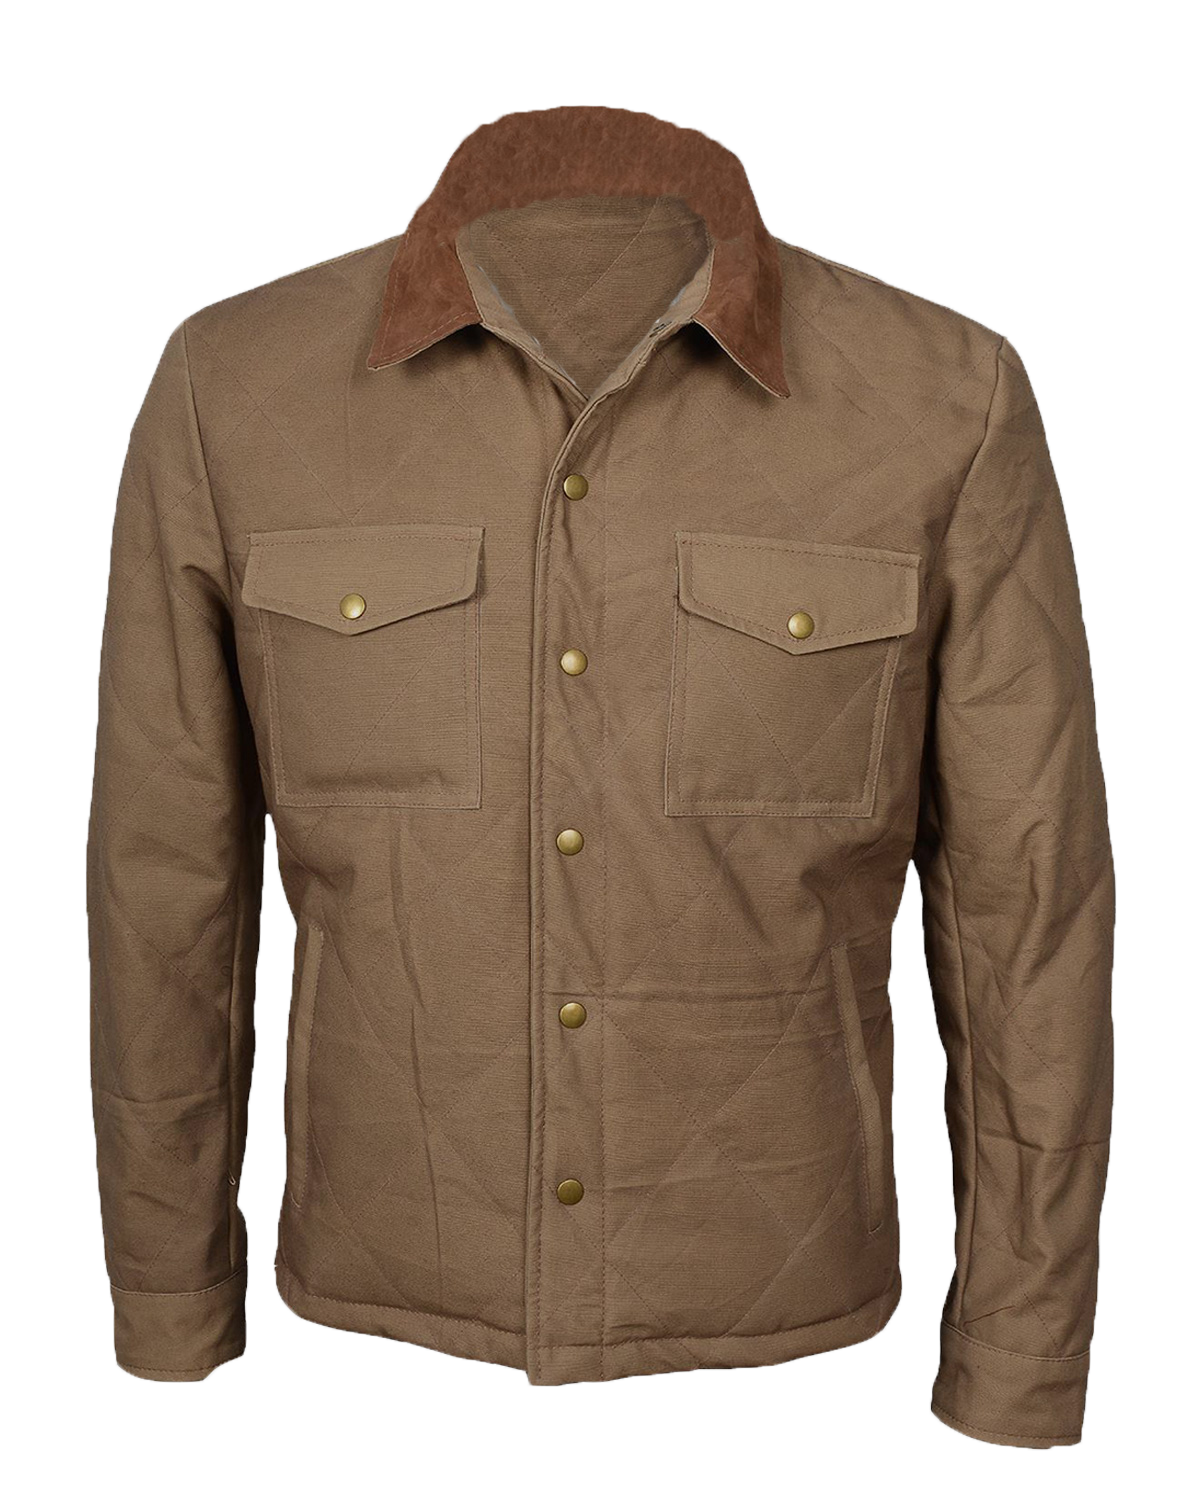 Yellowstone Mens Western Style Waxed Cotton Quilted Jackets